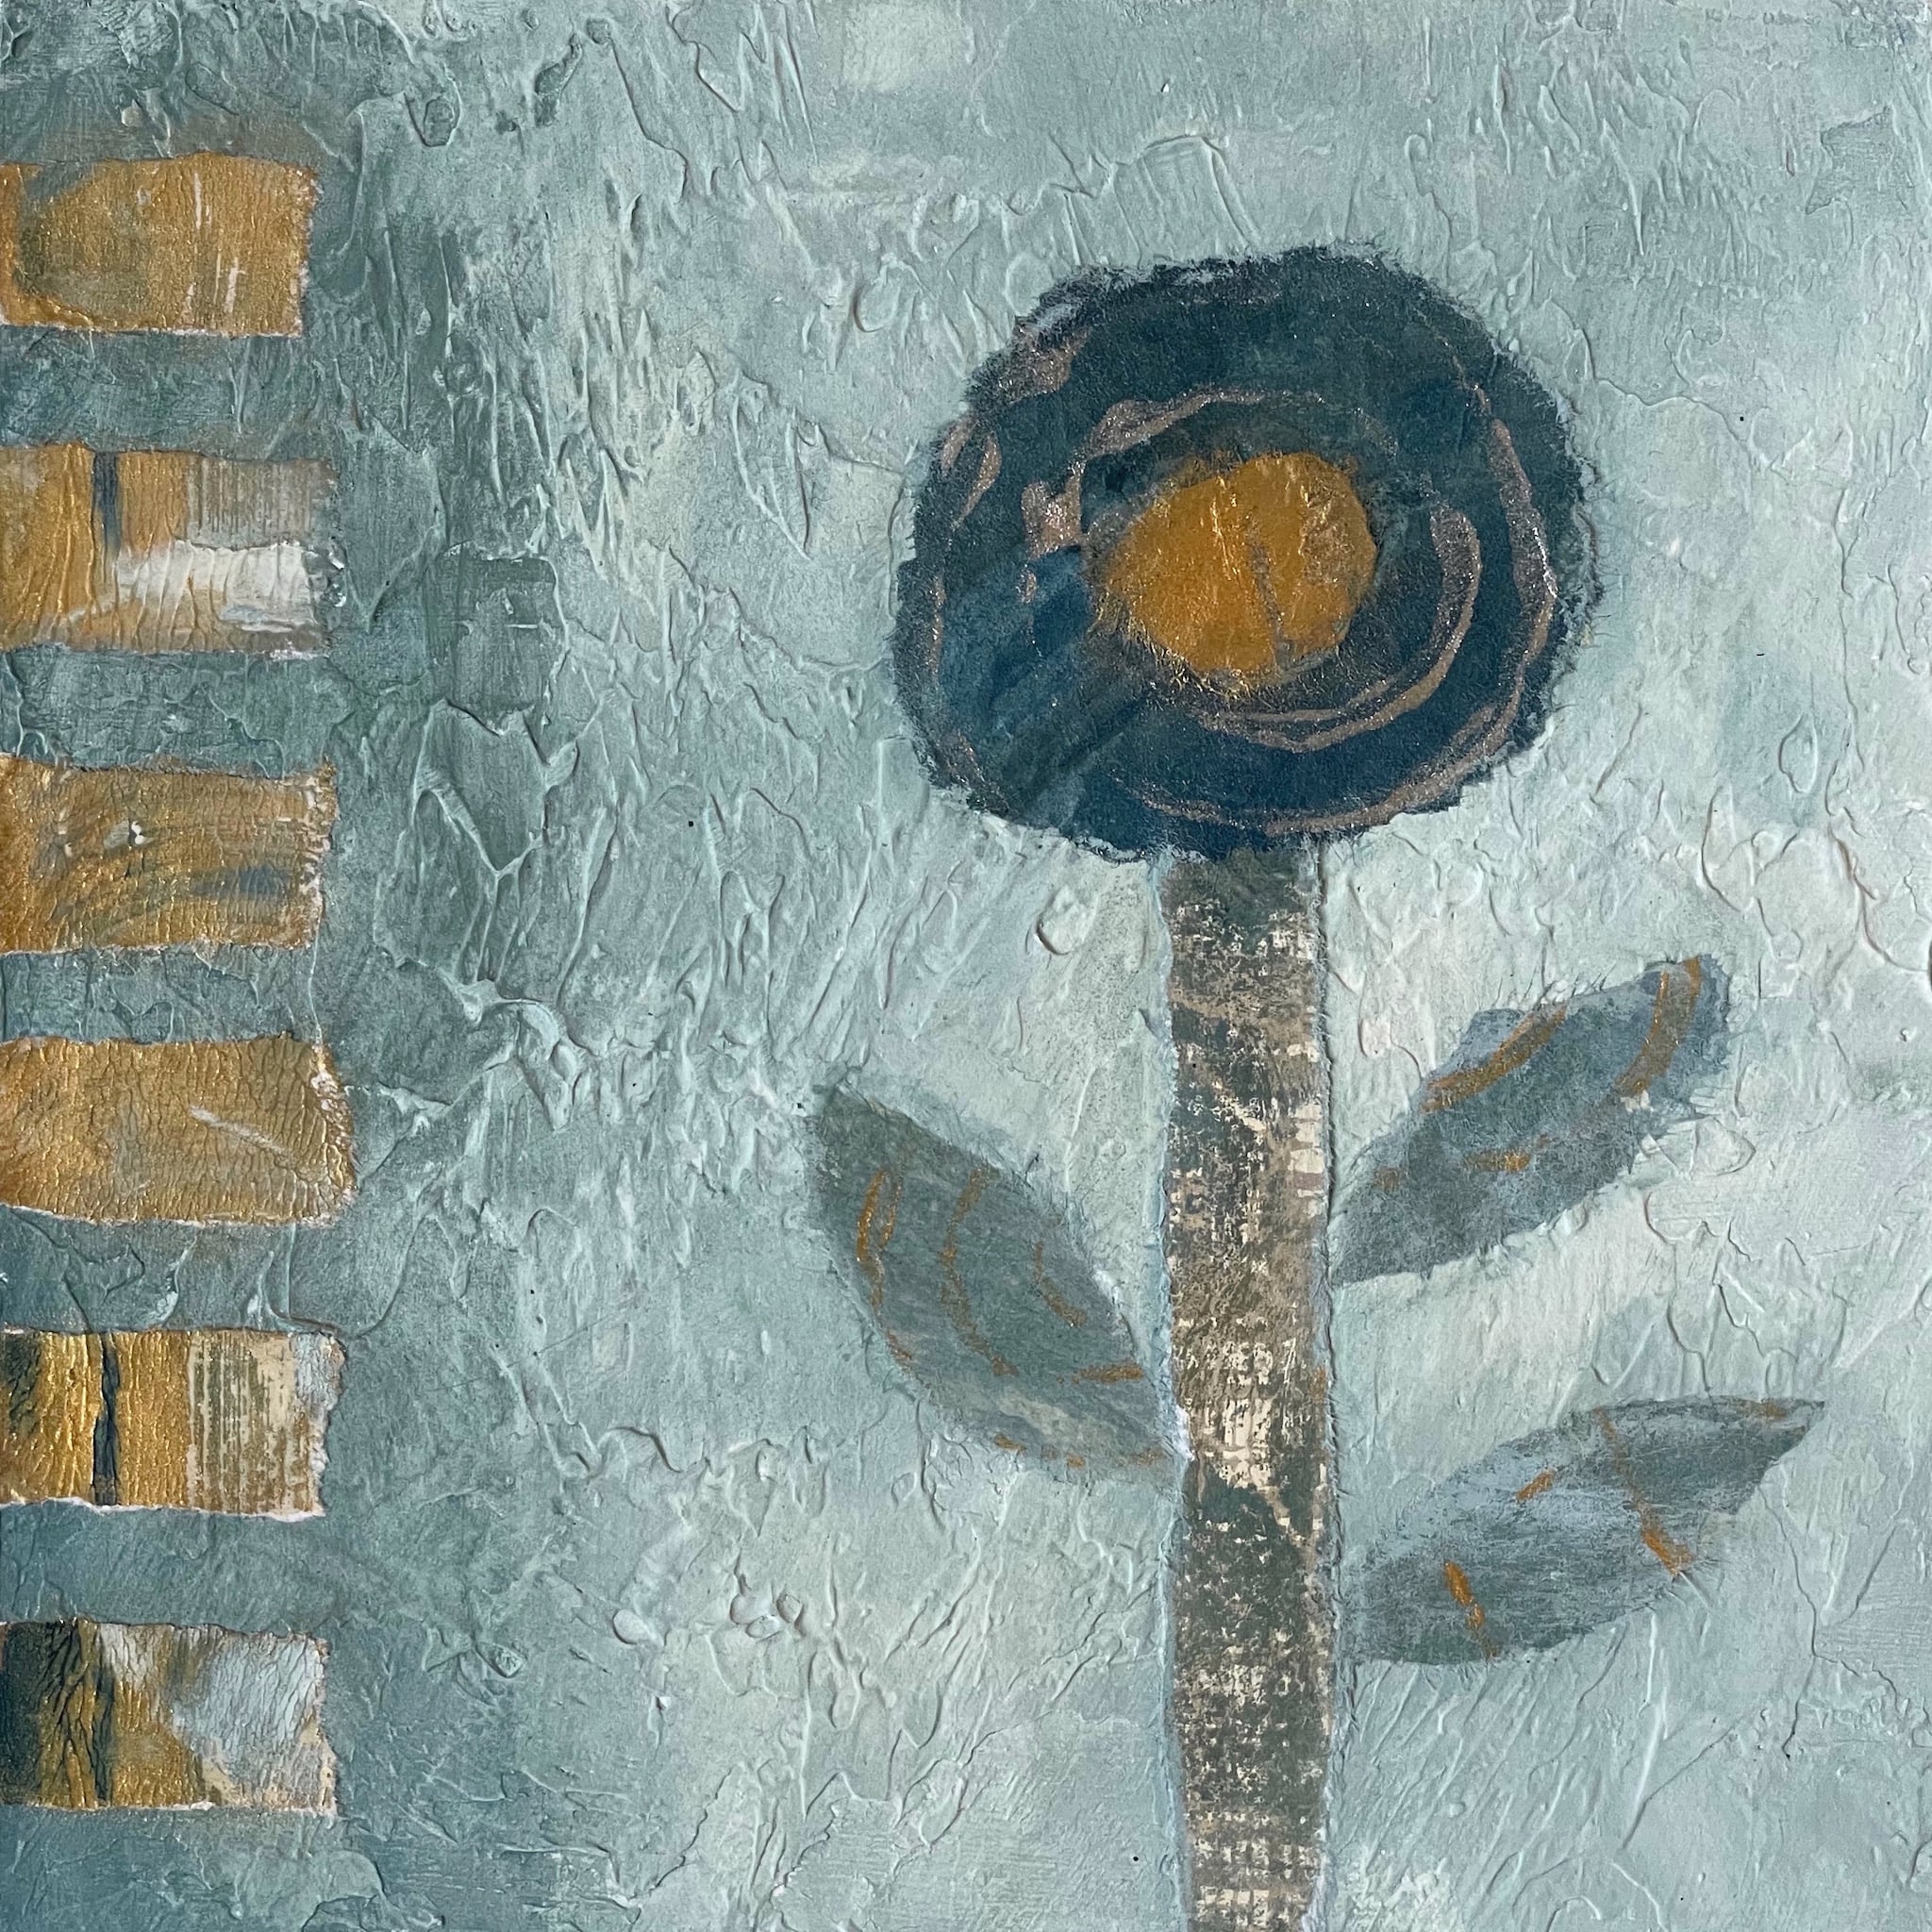 Semi abstract, mixed media painting by artist Sally MacCabe